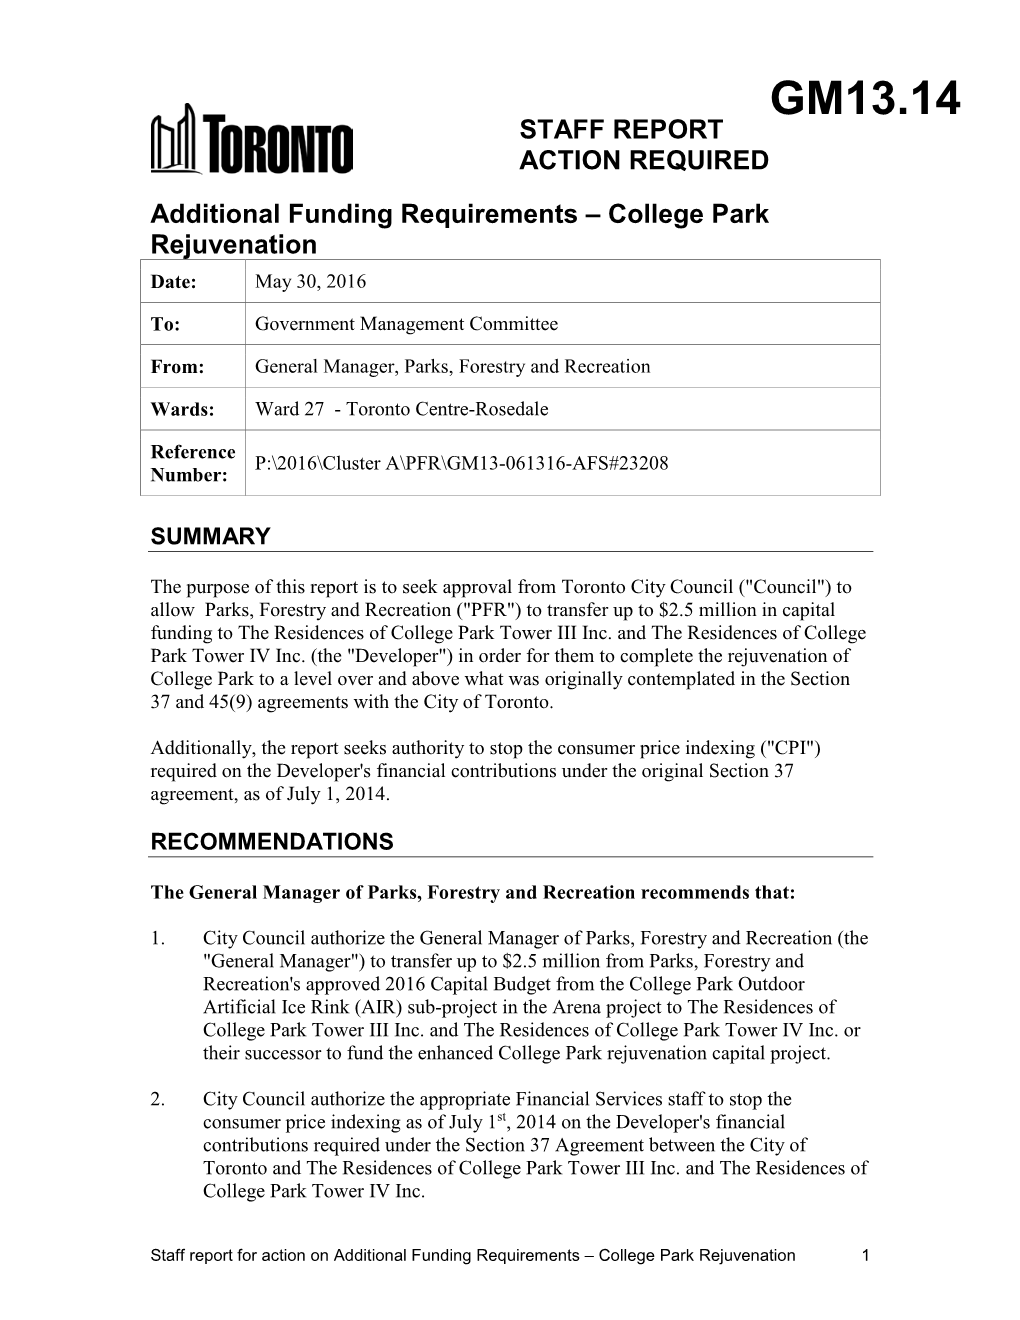 Additional Funding Requirements – College Park Rejuvenation Date: May 30, 2016